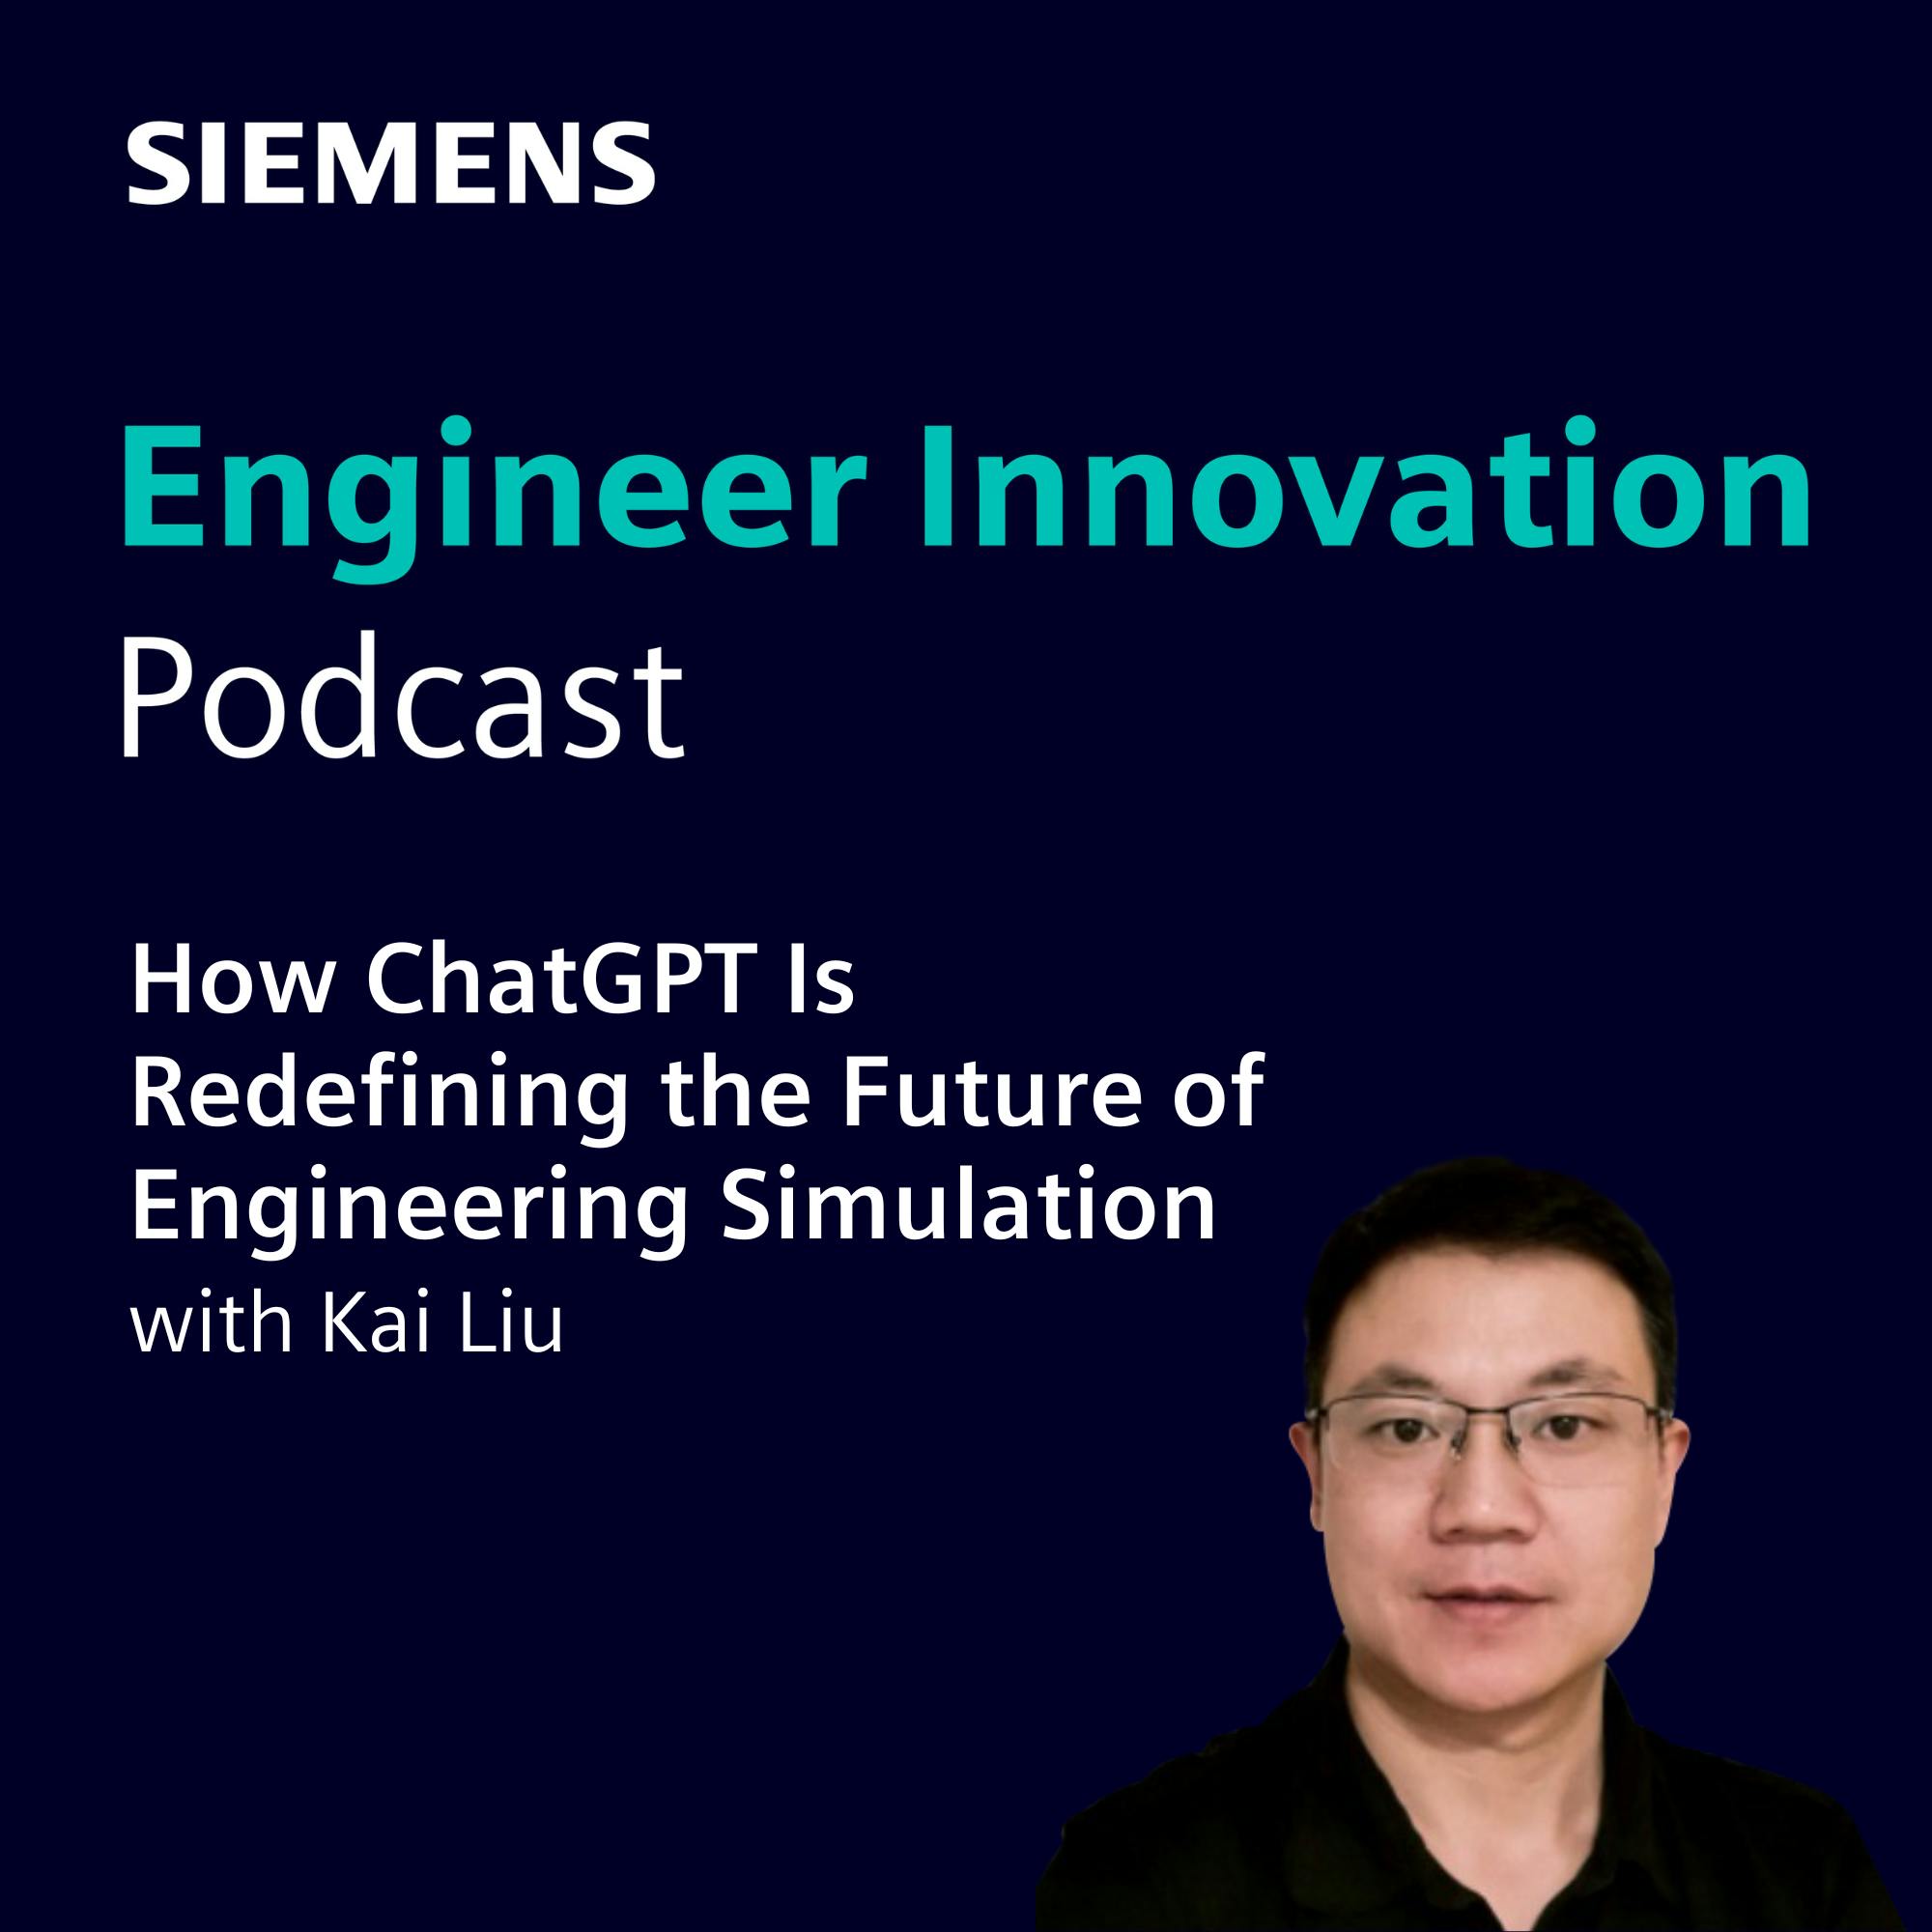 How ChatGPT Is Redefining the Future of Engineering Simulation